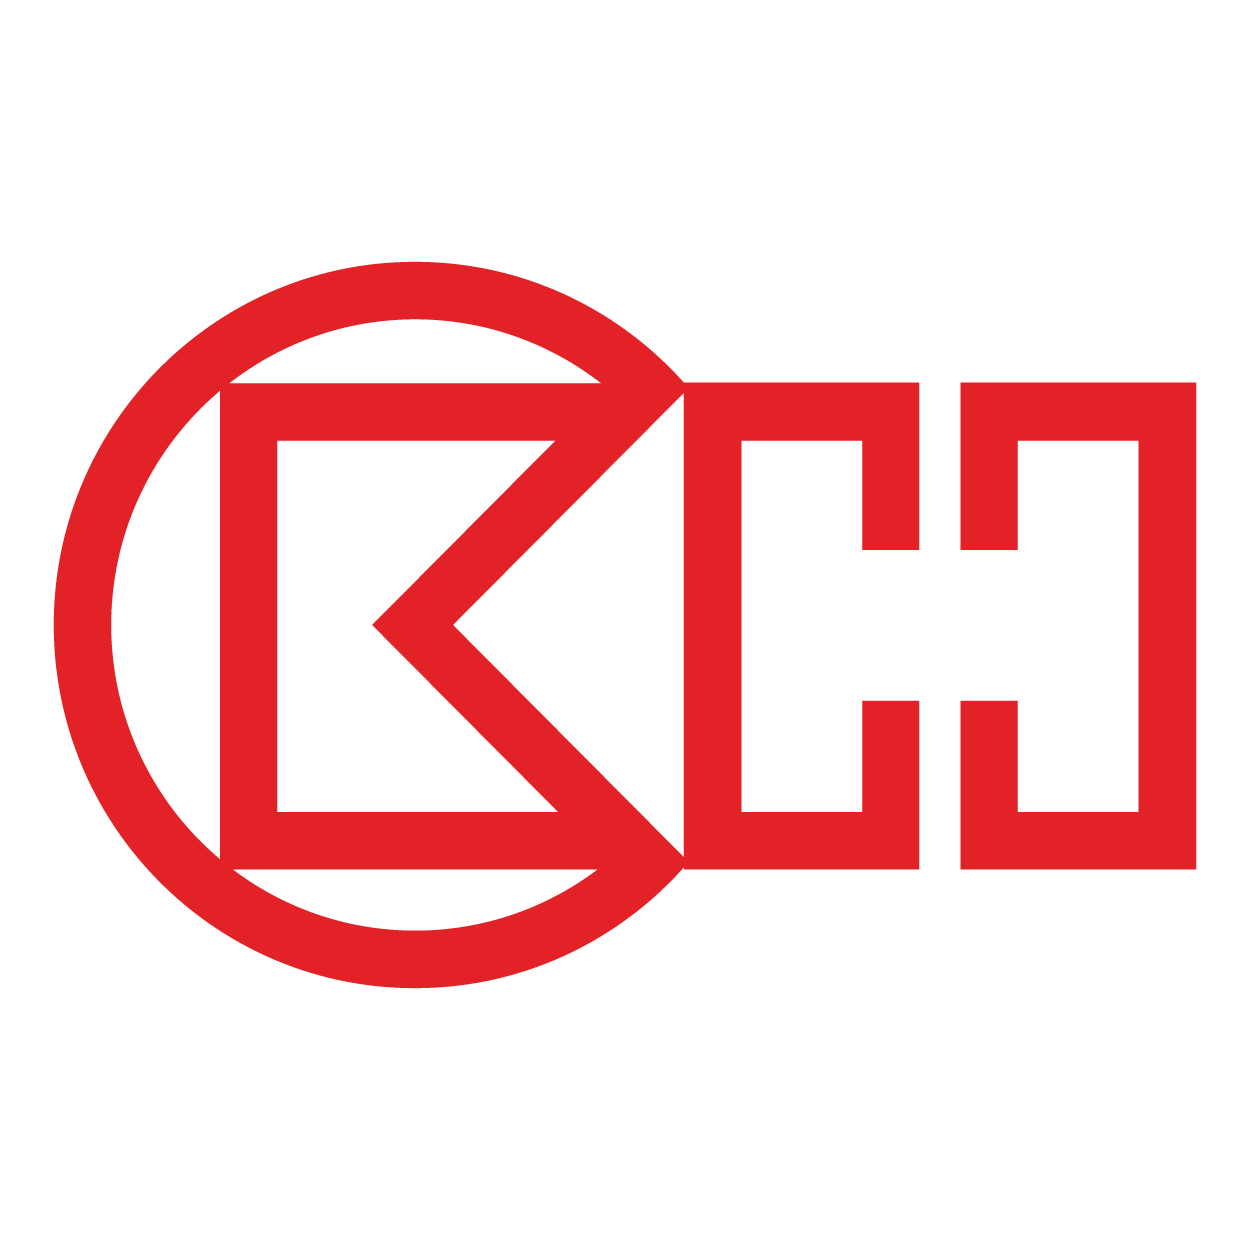 CK Hutchison Holdings Logo png